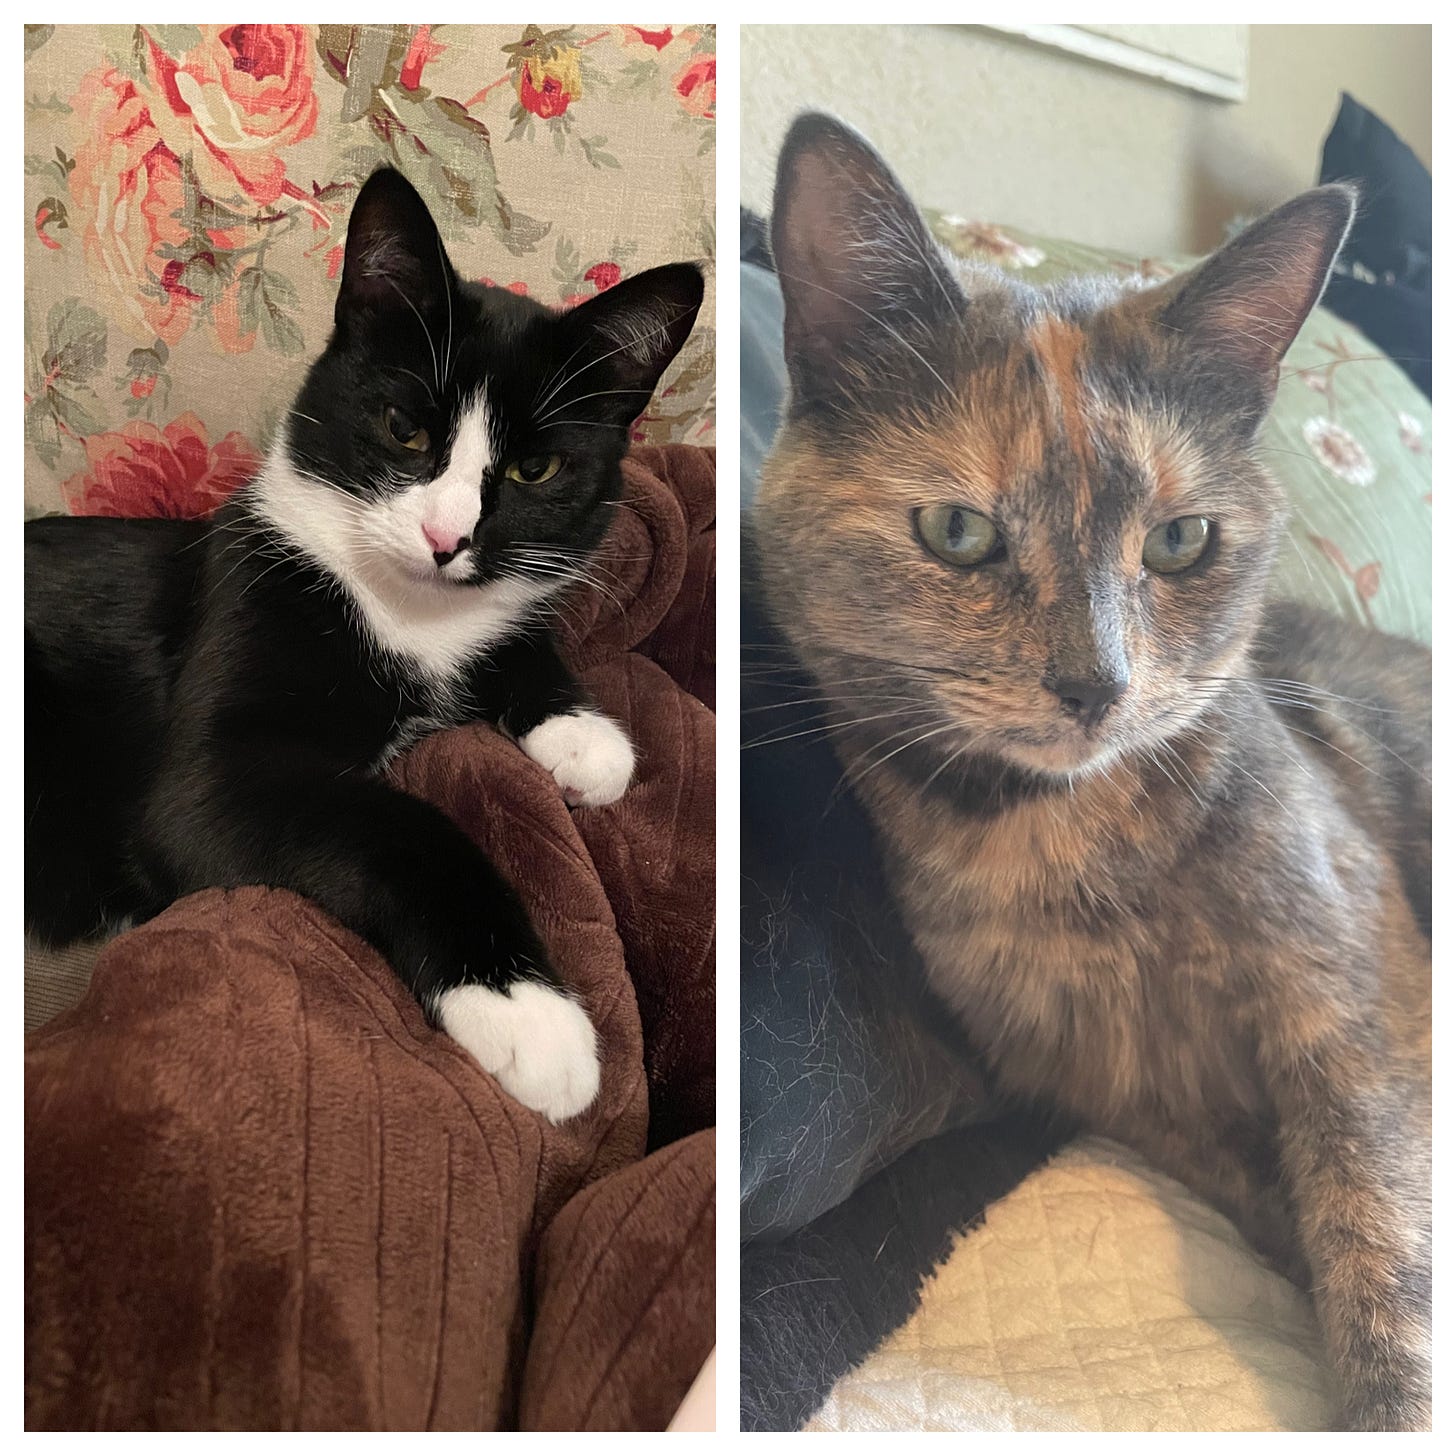 Left: A tuxedo cat sits in front of a pink floral decorative pillow. He rests his front paws on a brown blanket and looks soulfully into the camera. Right: A dilute tortoiseshell cat sits on a white couch, leaning against a black decorative pillow and crossing one front paw over the other while looking directly into the camera.